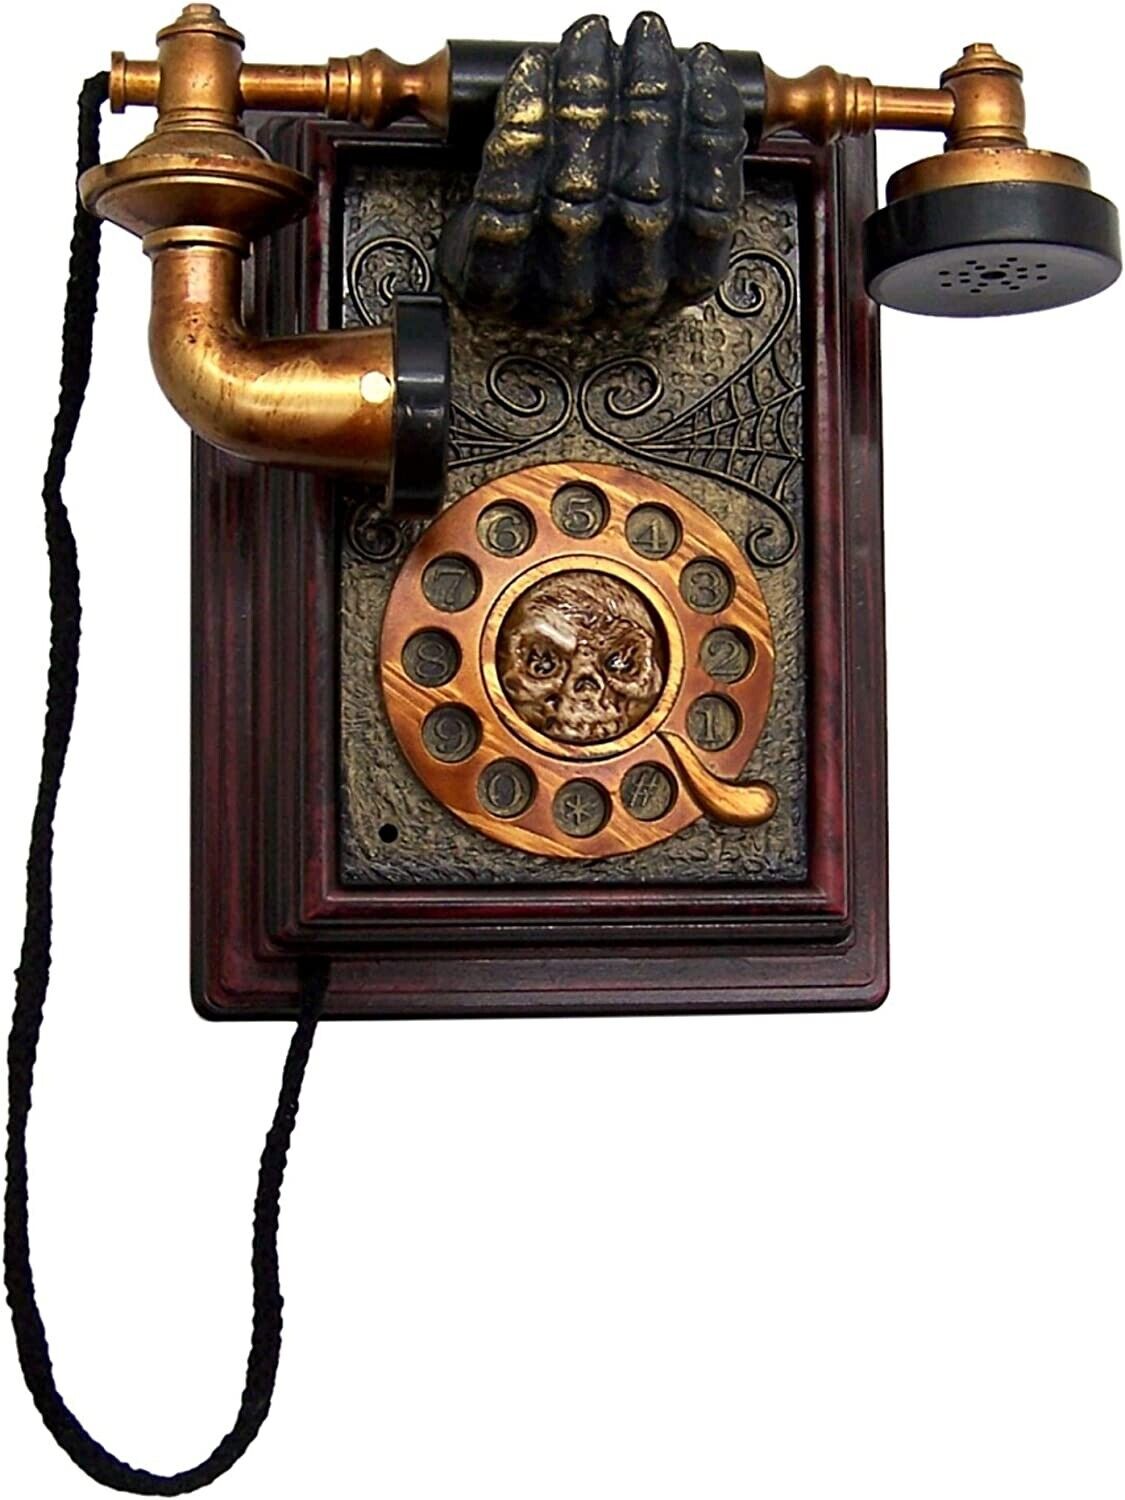 Animated Halloween Vintage Style Spooky Phone with Skeleton Hand